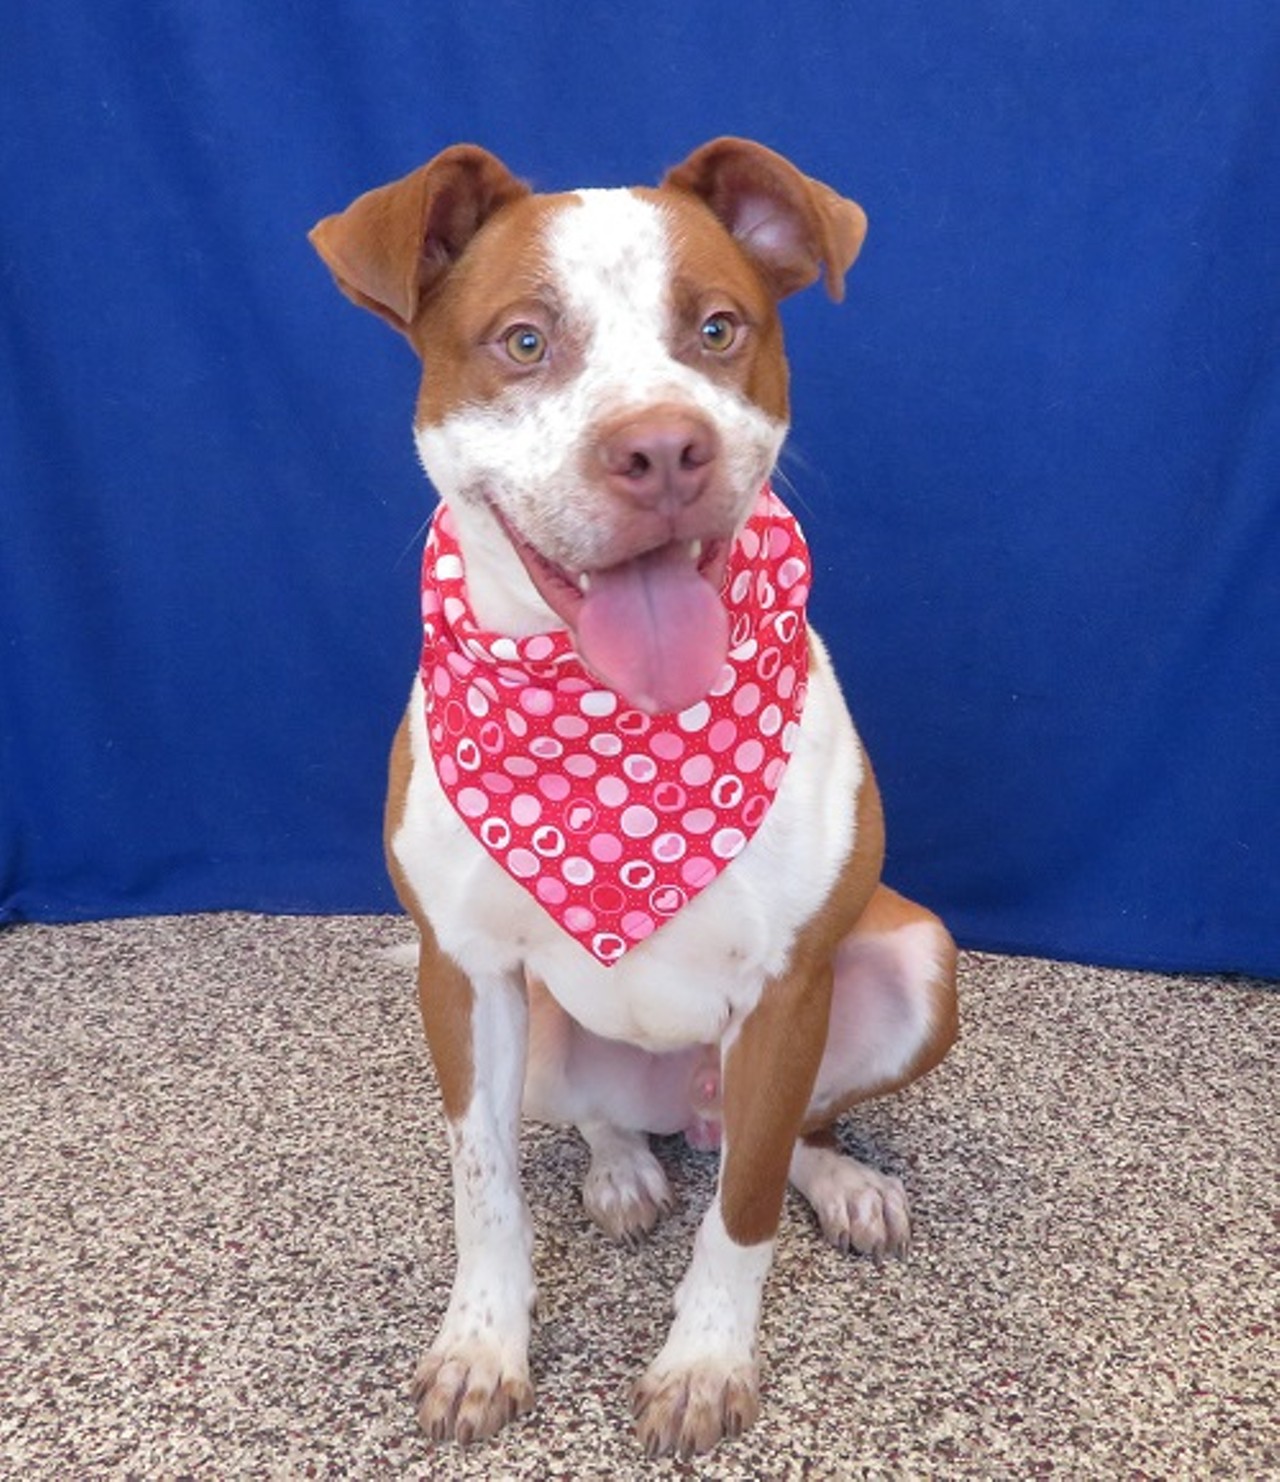 NAME: Artie
GENDER: Male
BREED: Labrador Retriever-Pit Bull Terrier mix
AGE: 2 years, 1 month
WEIGHT: 55 pounds
REASON I CAME TO MHS: Agency transfer
LOCATION: Petco of Sterling Heights
ID NUMBER: 863794